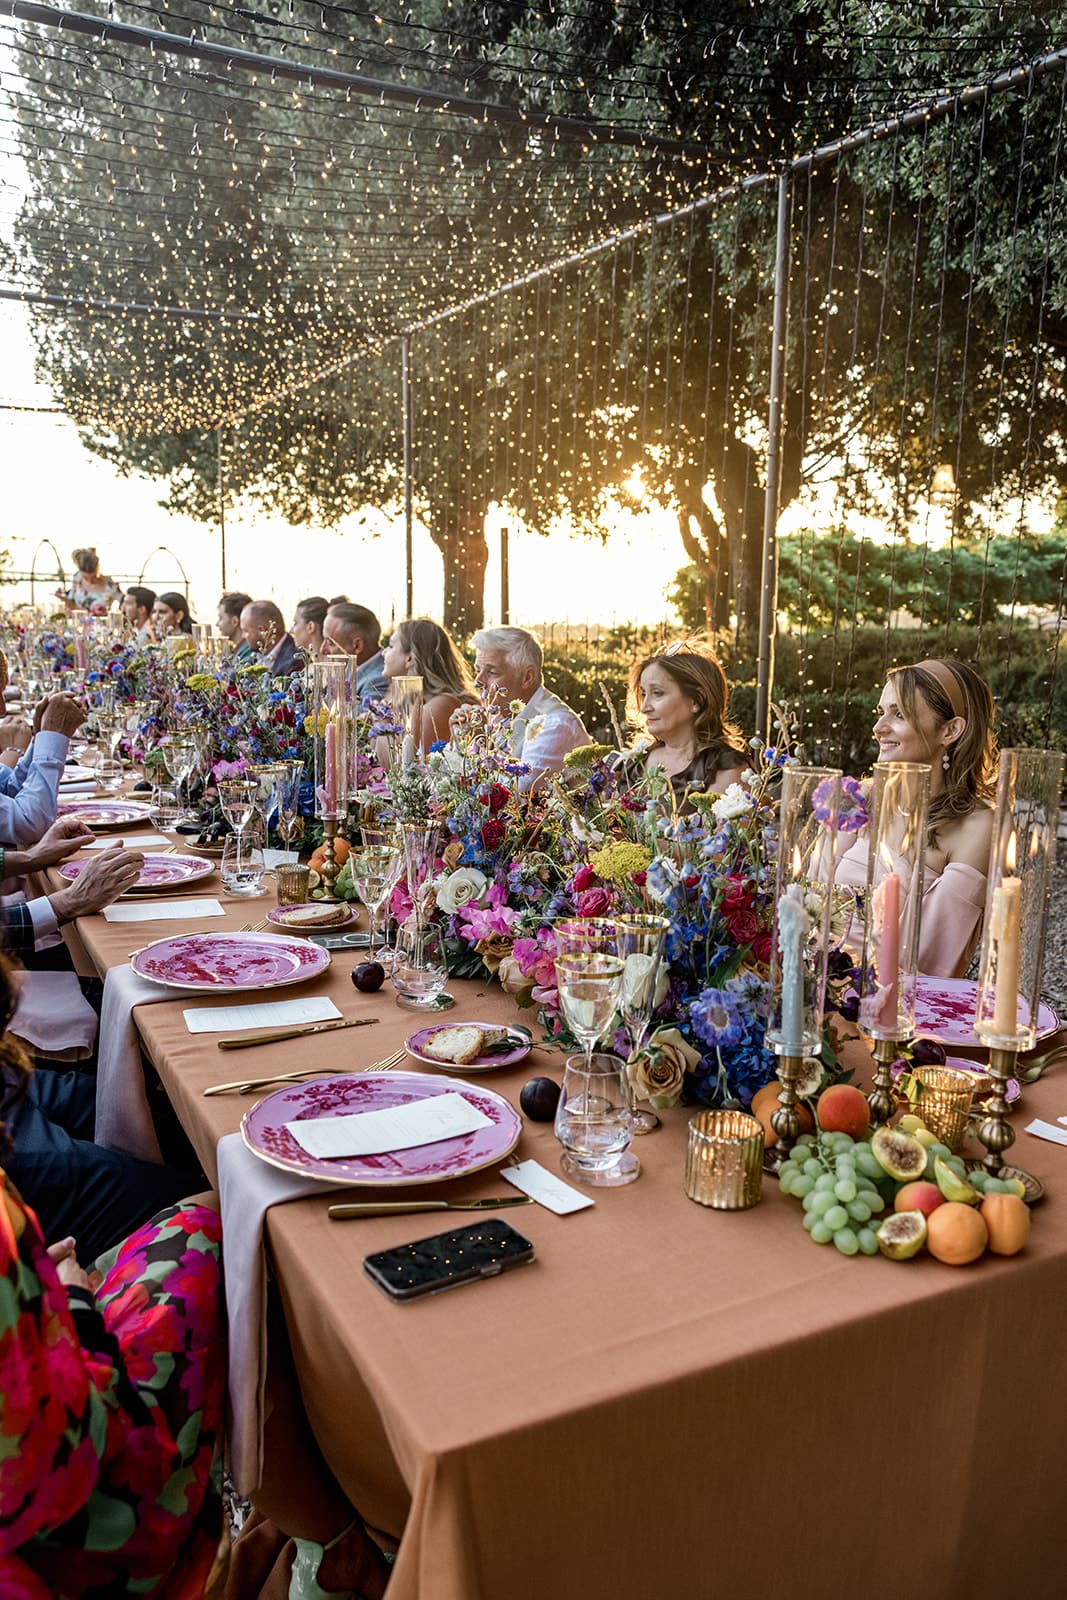 Guests sit at banquet style table in Tuscany Italy for wedding anniversary reception